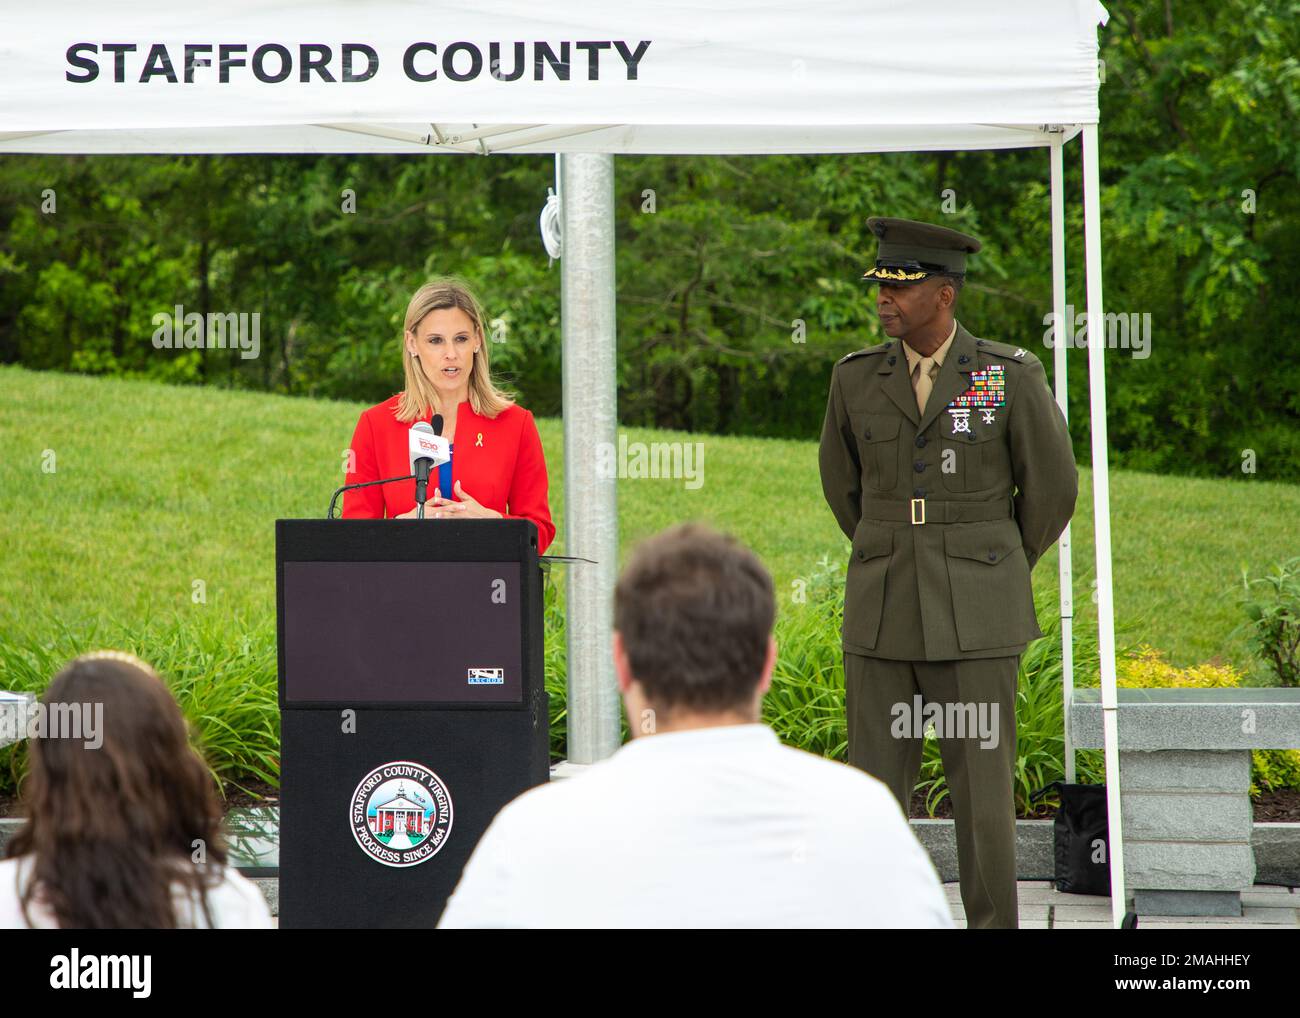 Stafford County Board of Supervisors, Chairman Crystal Vanuch, gives opening remarks during the Stafford County Armed Services Memorial Day ceremony at Stafford, Virginia, May 27, 2022. Memorial Day is a day to honor all the men and women who have made the ultimate sacrifice in service to their country. Stock Photo